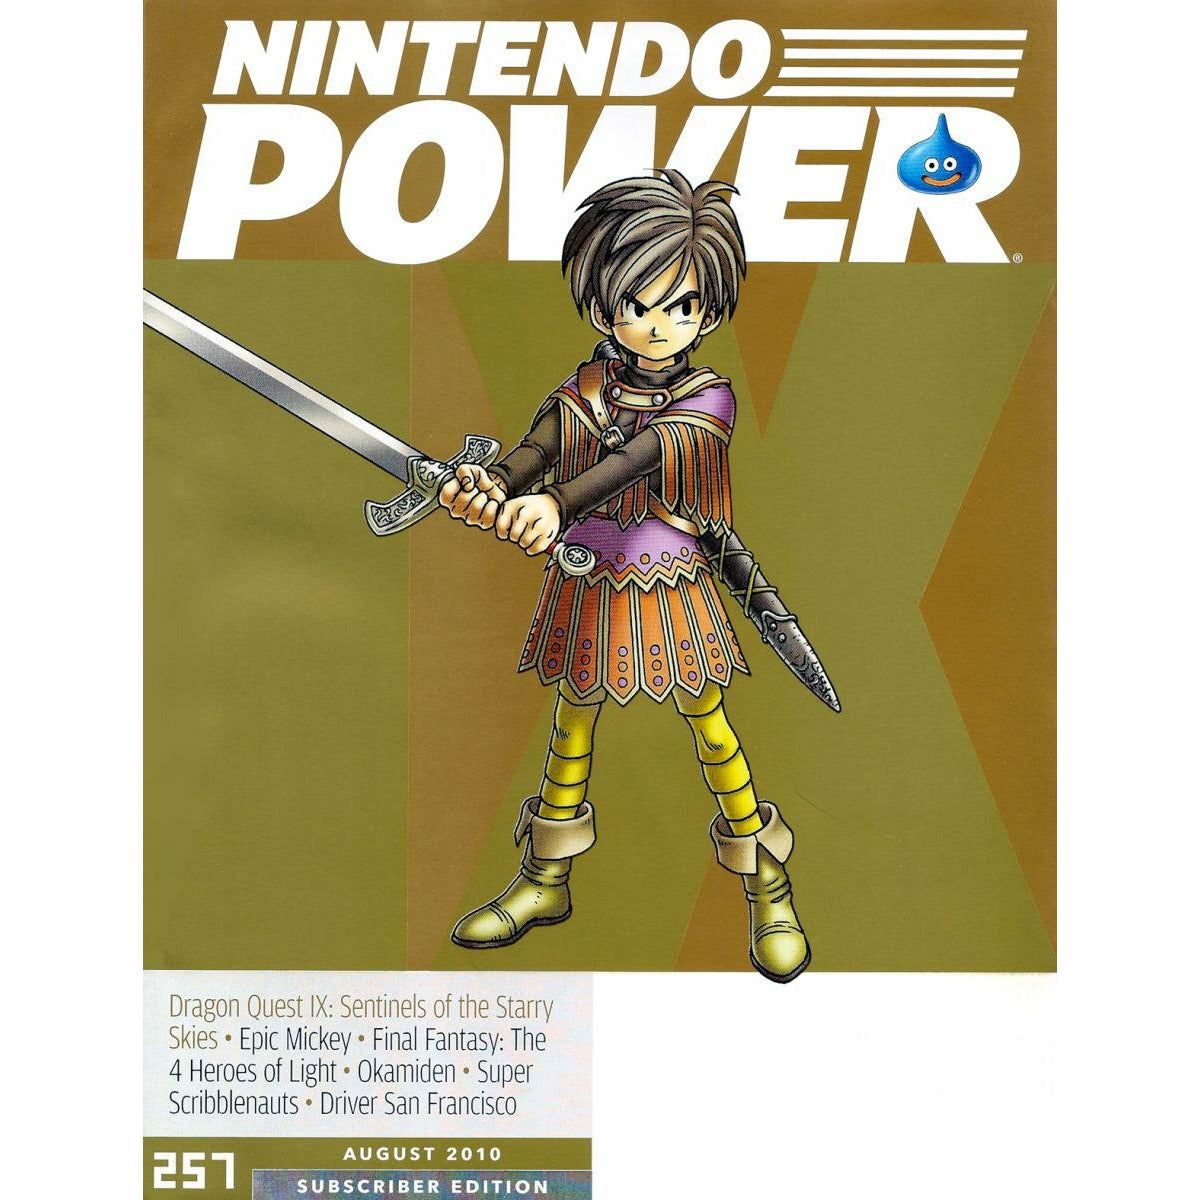 Nintendo Power Magazine (#257 Subscriber Edition) - Complete and/or Good Condition